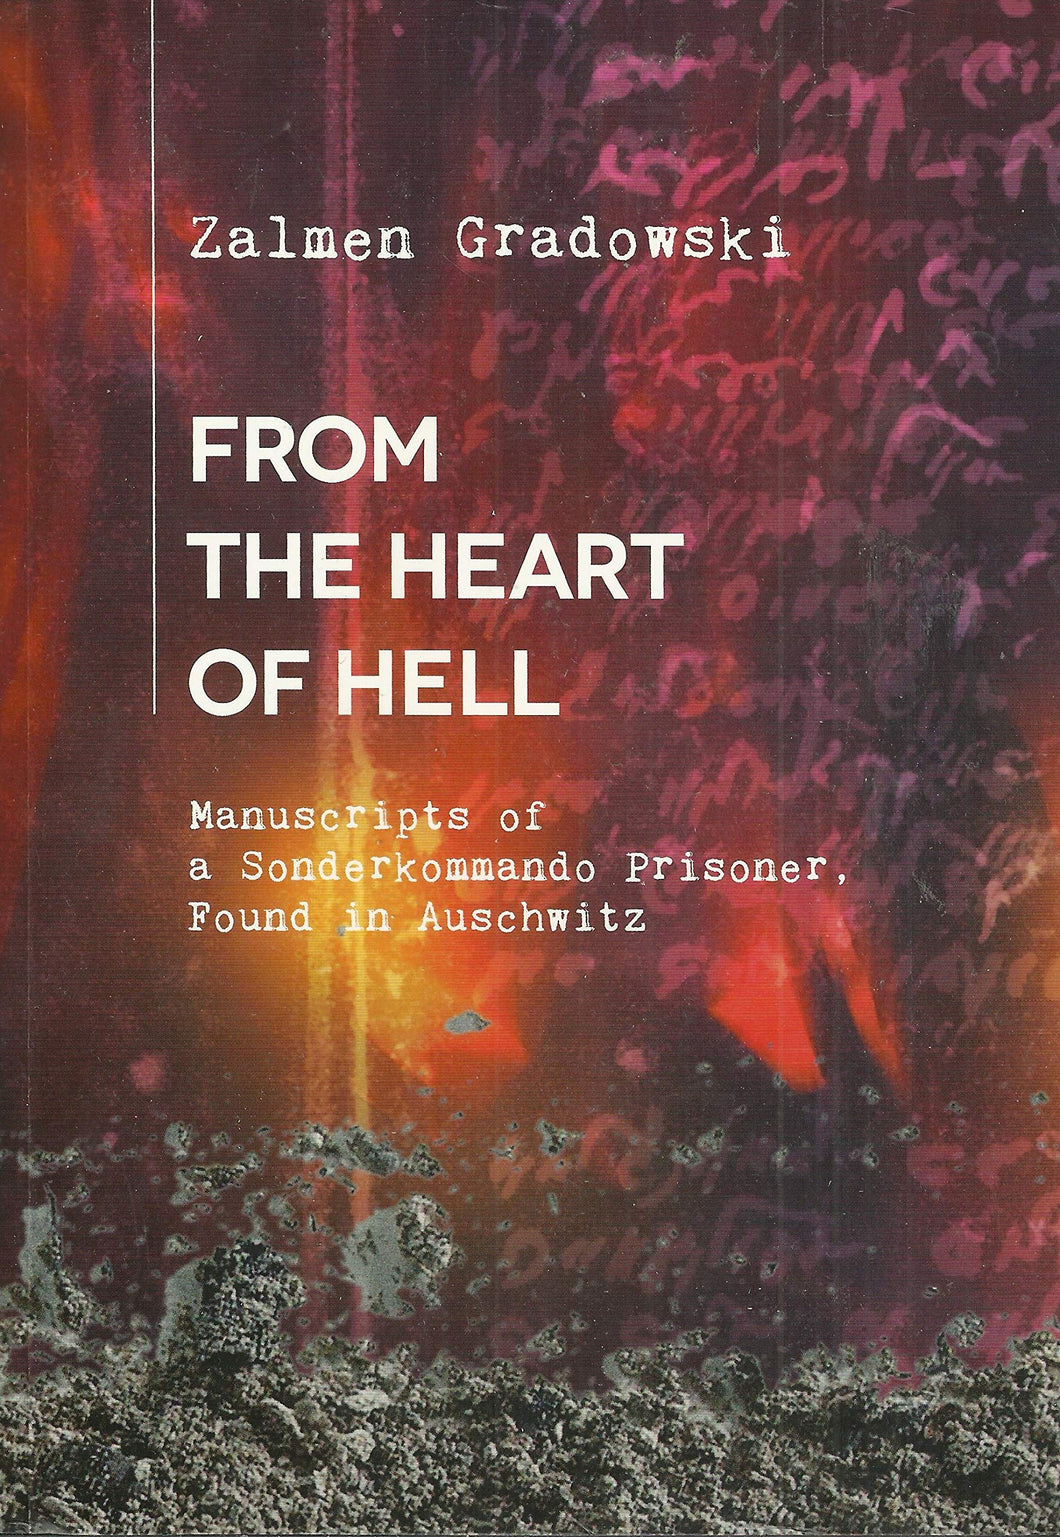 From the Heart of Hell: Manuscripts of a Sonderkommando Prisoner, Found in Auschwitz